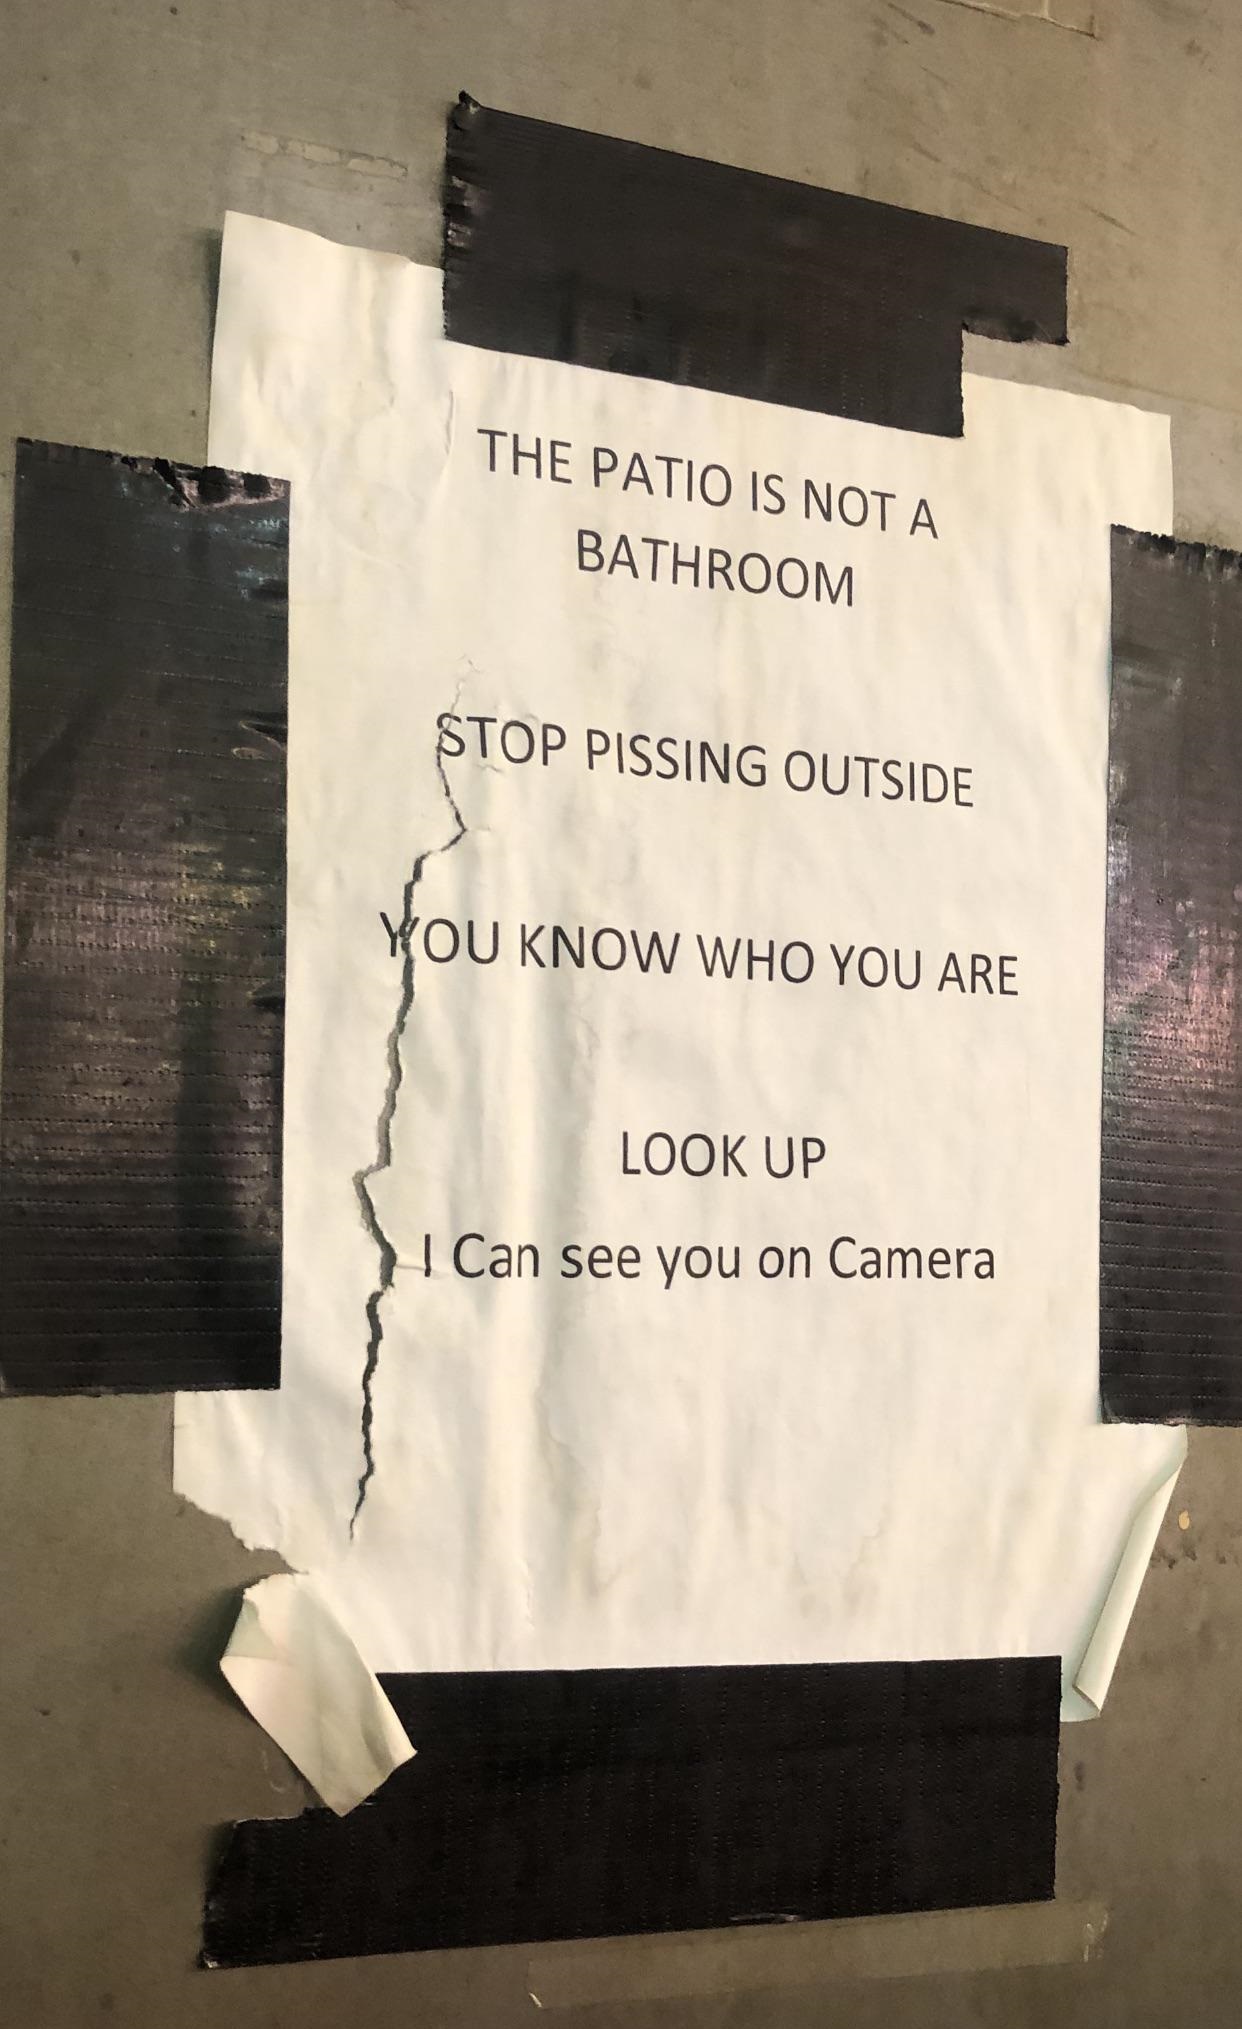 The Patio Is Not A Bathroom Stop Pissing Outside You Know Who You Are Look Up } ! Can see you on Camera